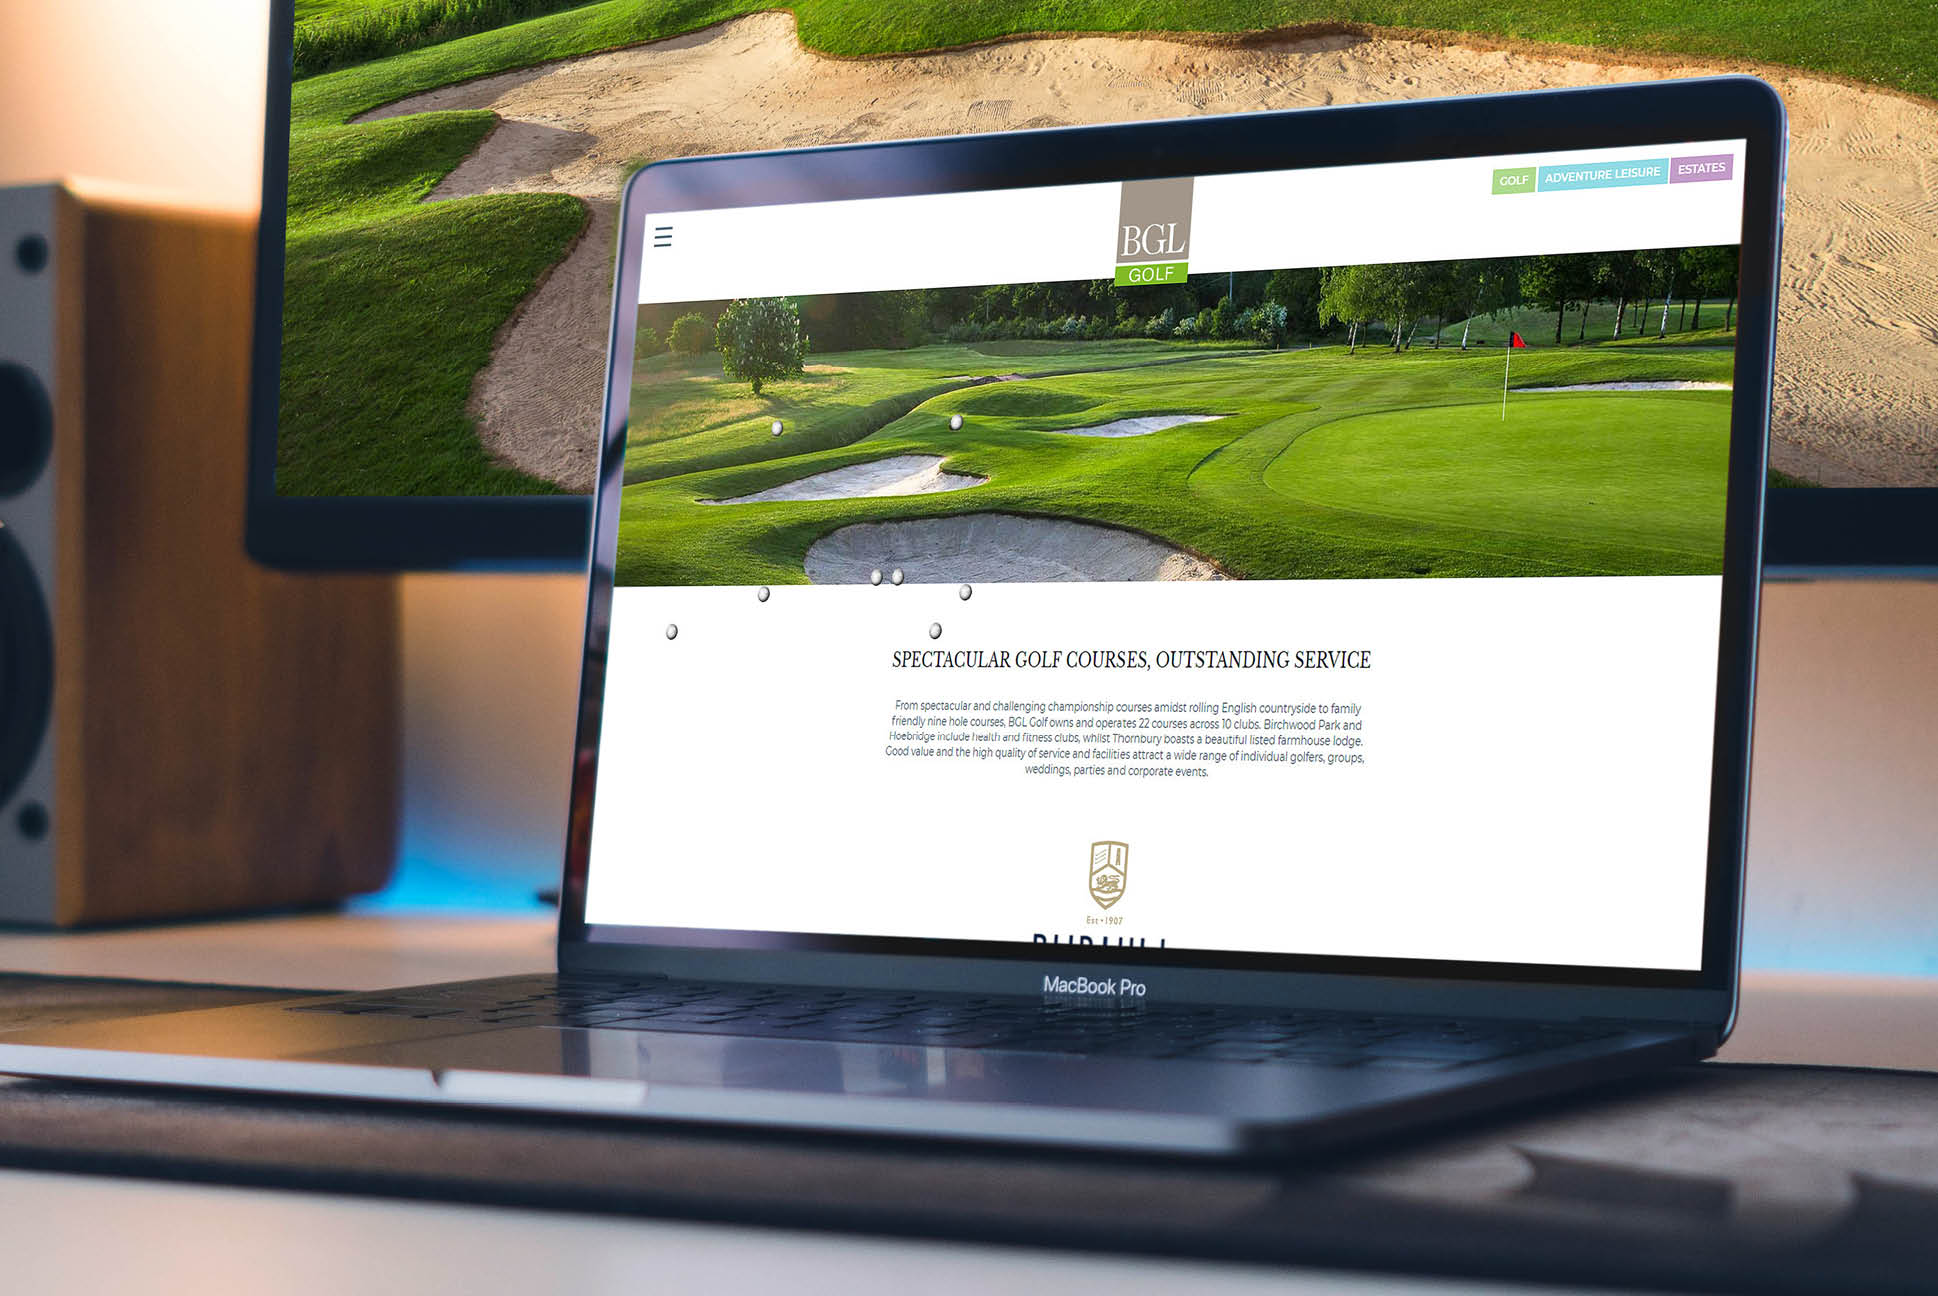 Independent Marketing - Strategic Consulting for Branding and Marketing | BGL Golf